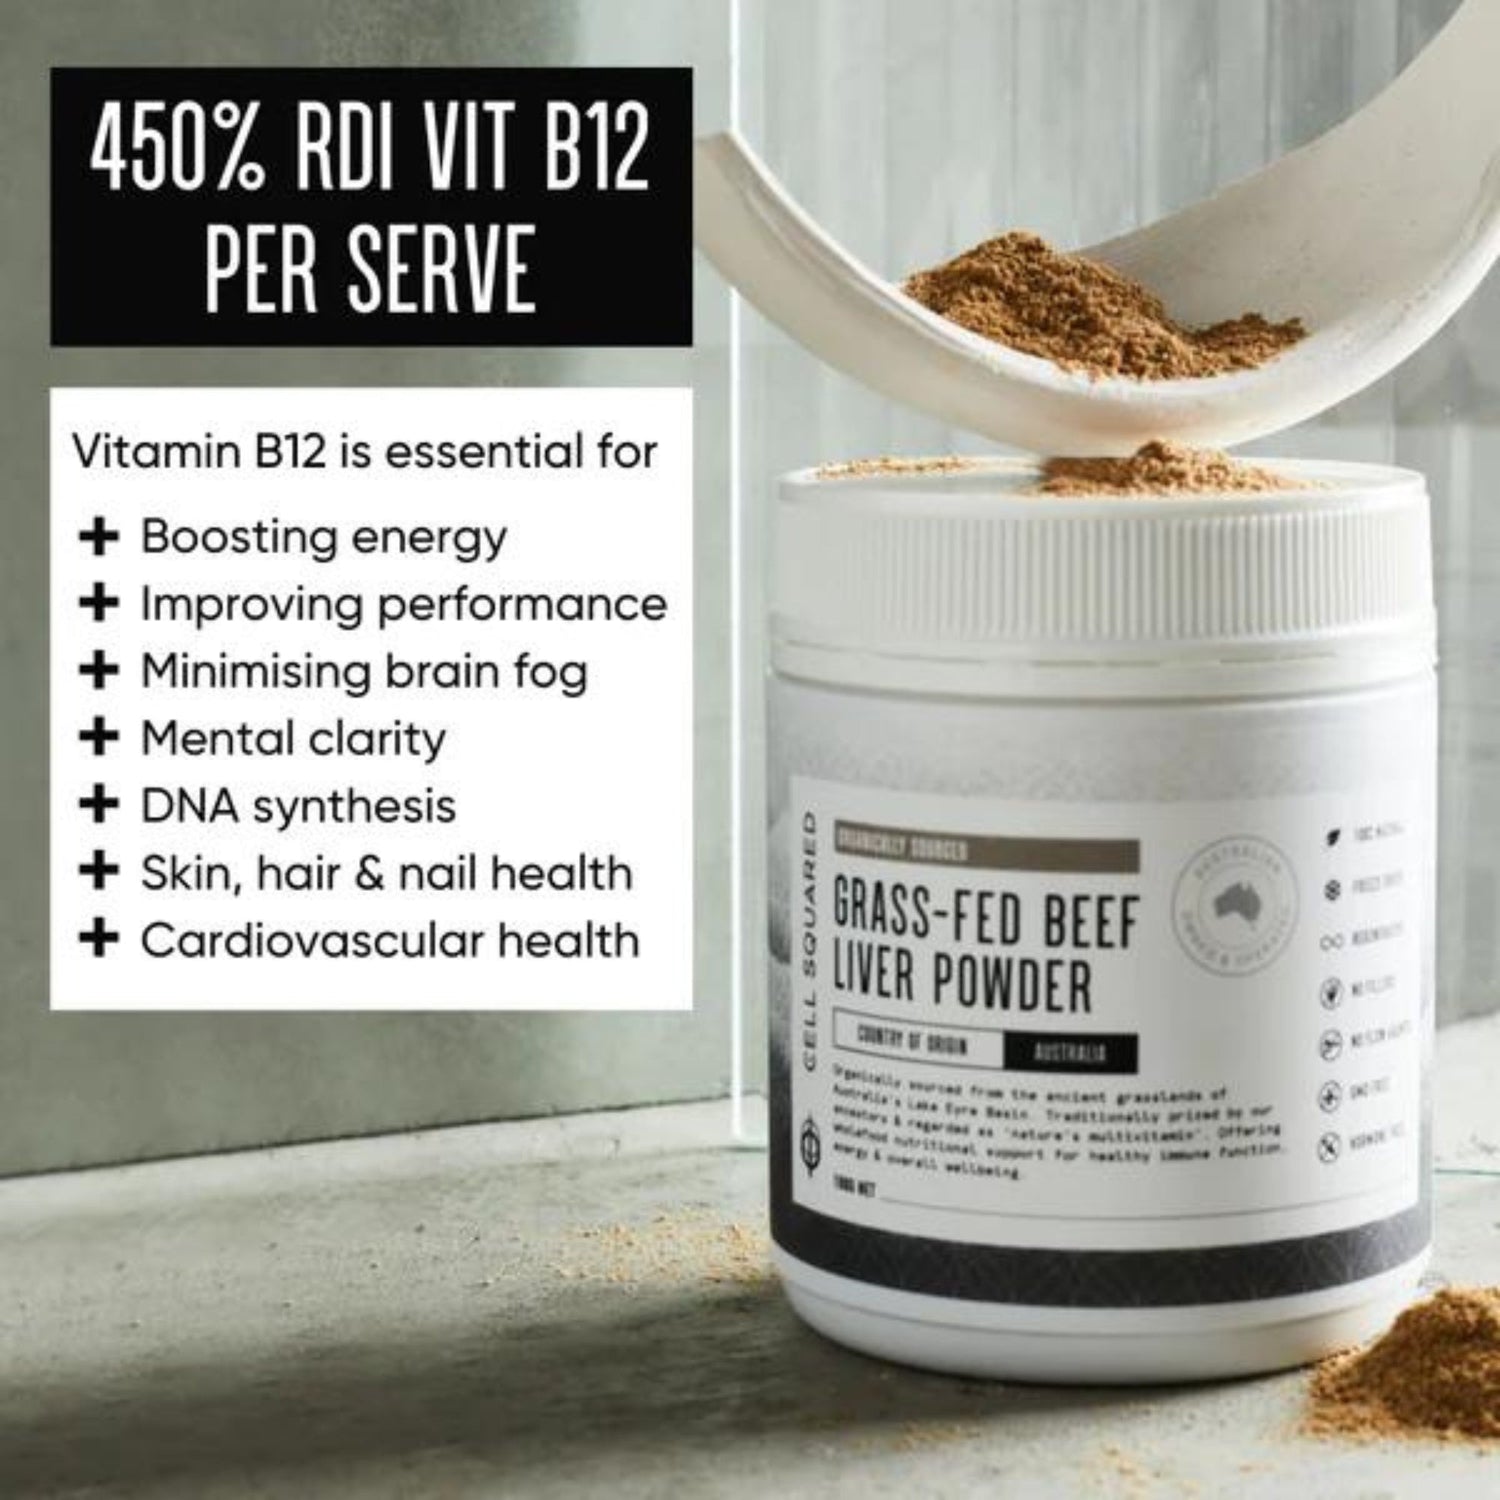 ACO Certified Organic Grass Fed Beef Liver Powder Vitamins and Health